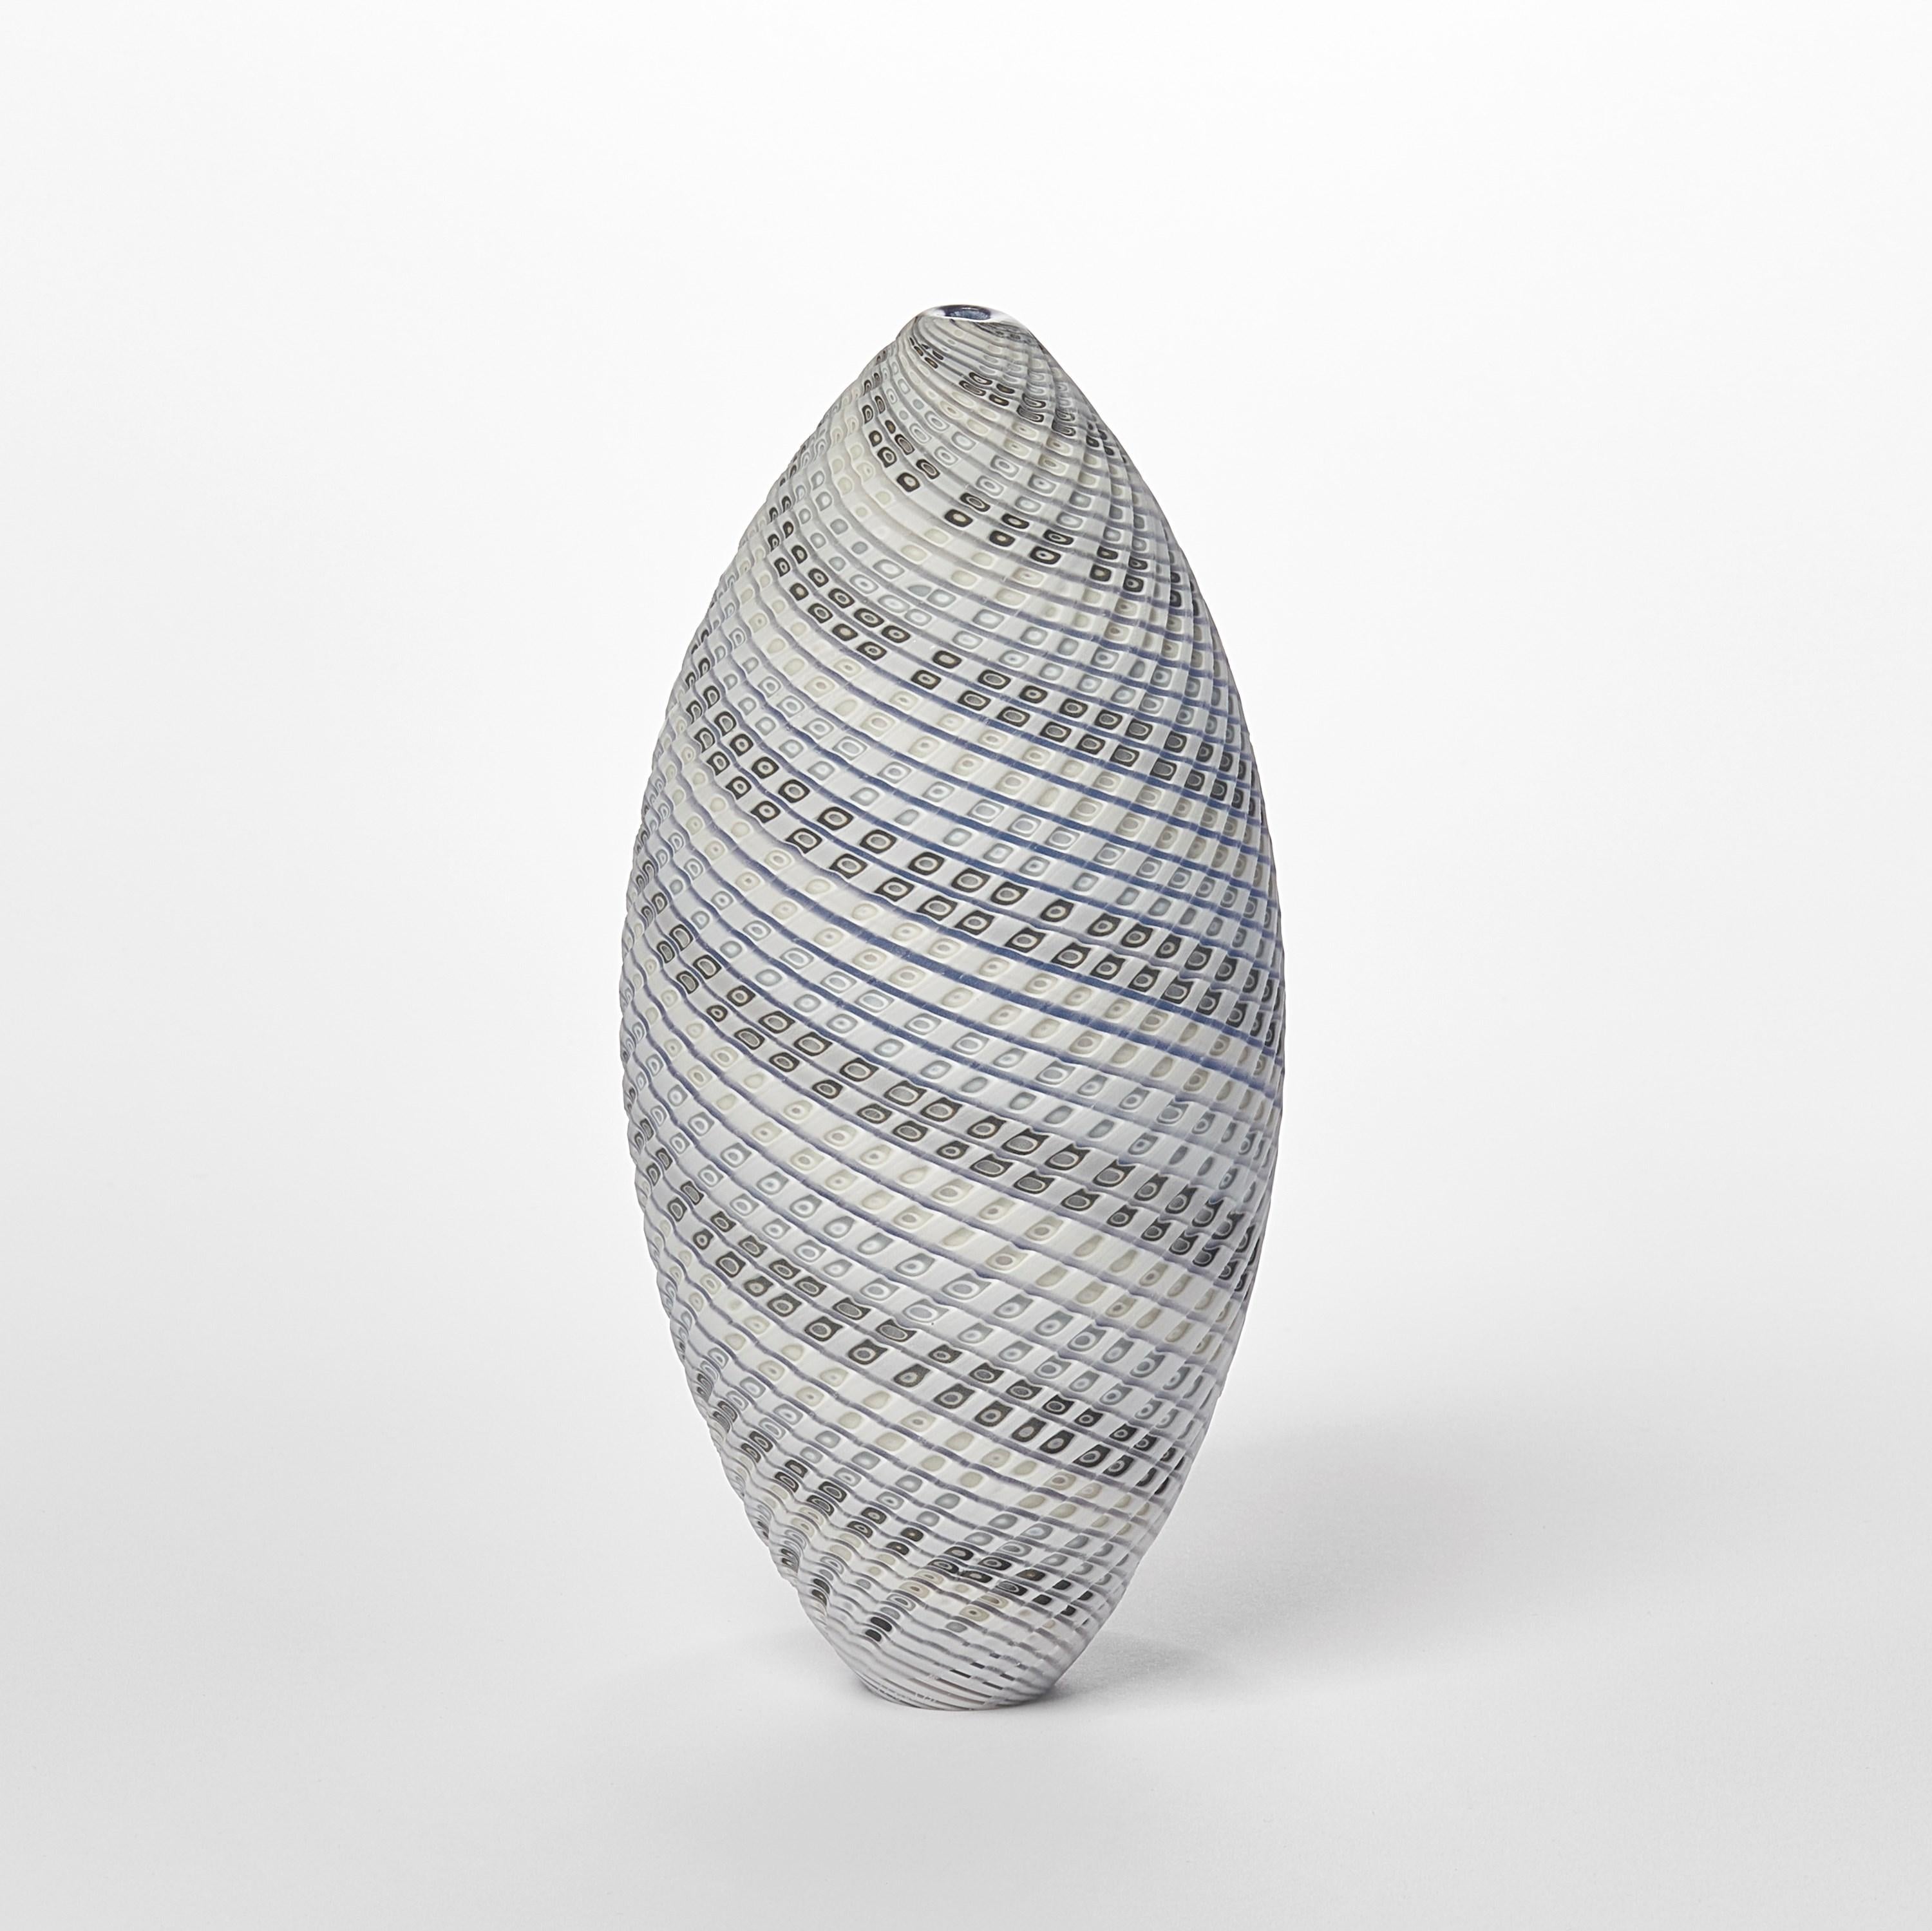 'Woven Three Tone Blue Ovoid (sm)' is a unique handblown, sculpted and cut glass sculpture by the British artist, Layne Rowe.

Rowe’s inspiration is drawn from the dramatic Devon coastline which informs his love for detail, a constant theme for his